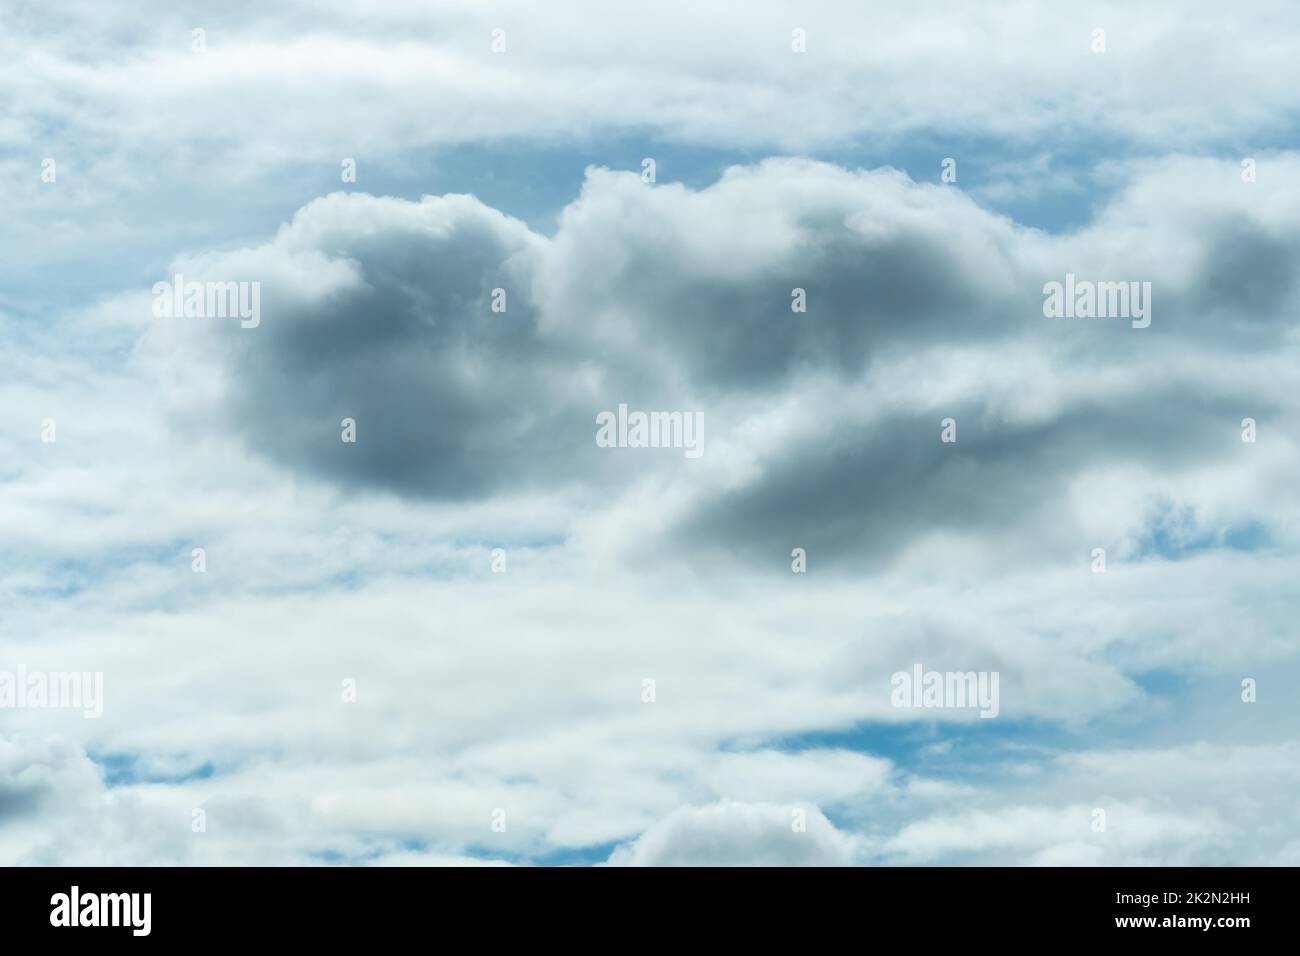 White and gray fluffy clouds on blue sky. Soft touch feeling like cotton. White puffy cloudscape. Beauty in nature. Close-up white clouds texture background. Cloudy sky. Background for tranquility. Stock Photo